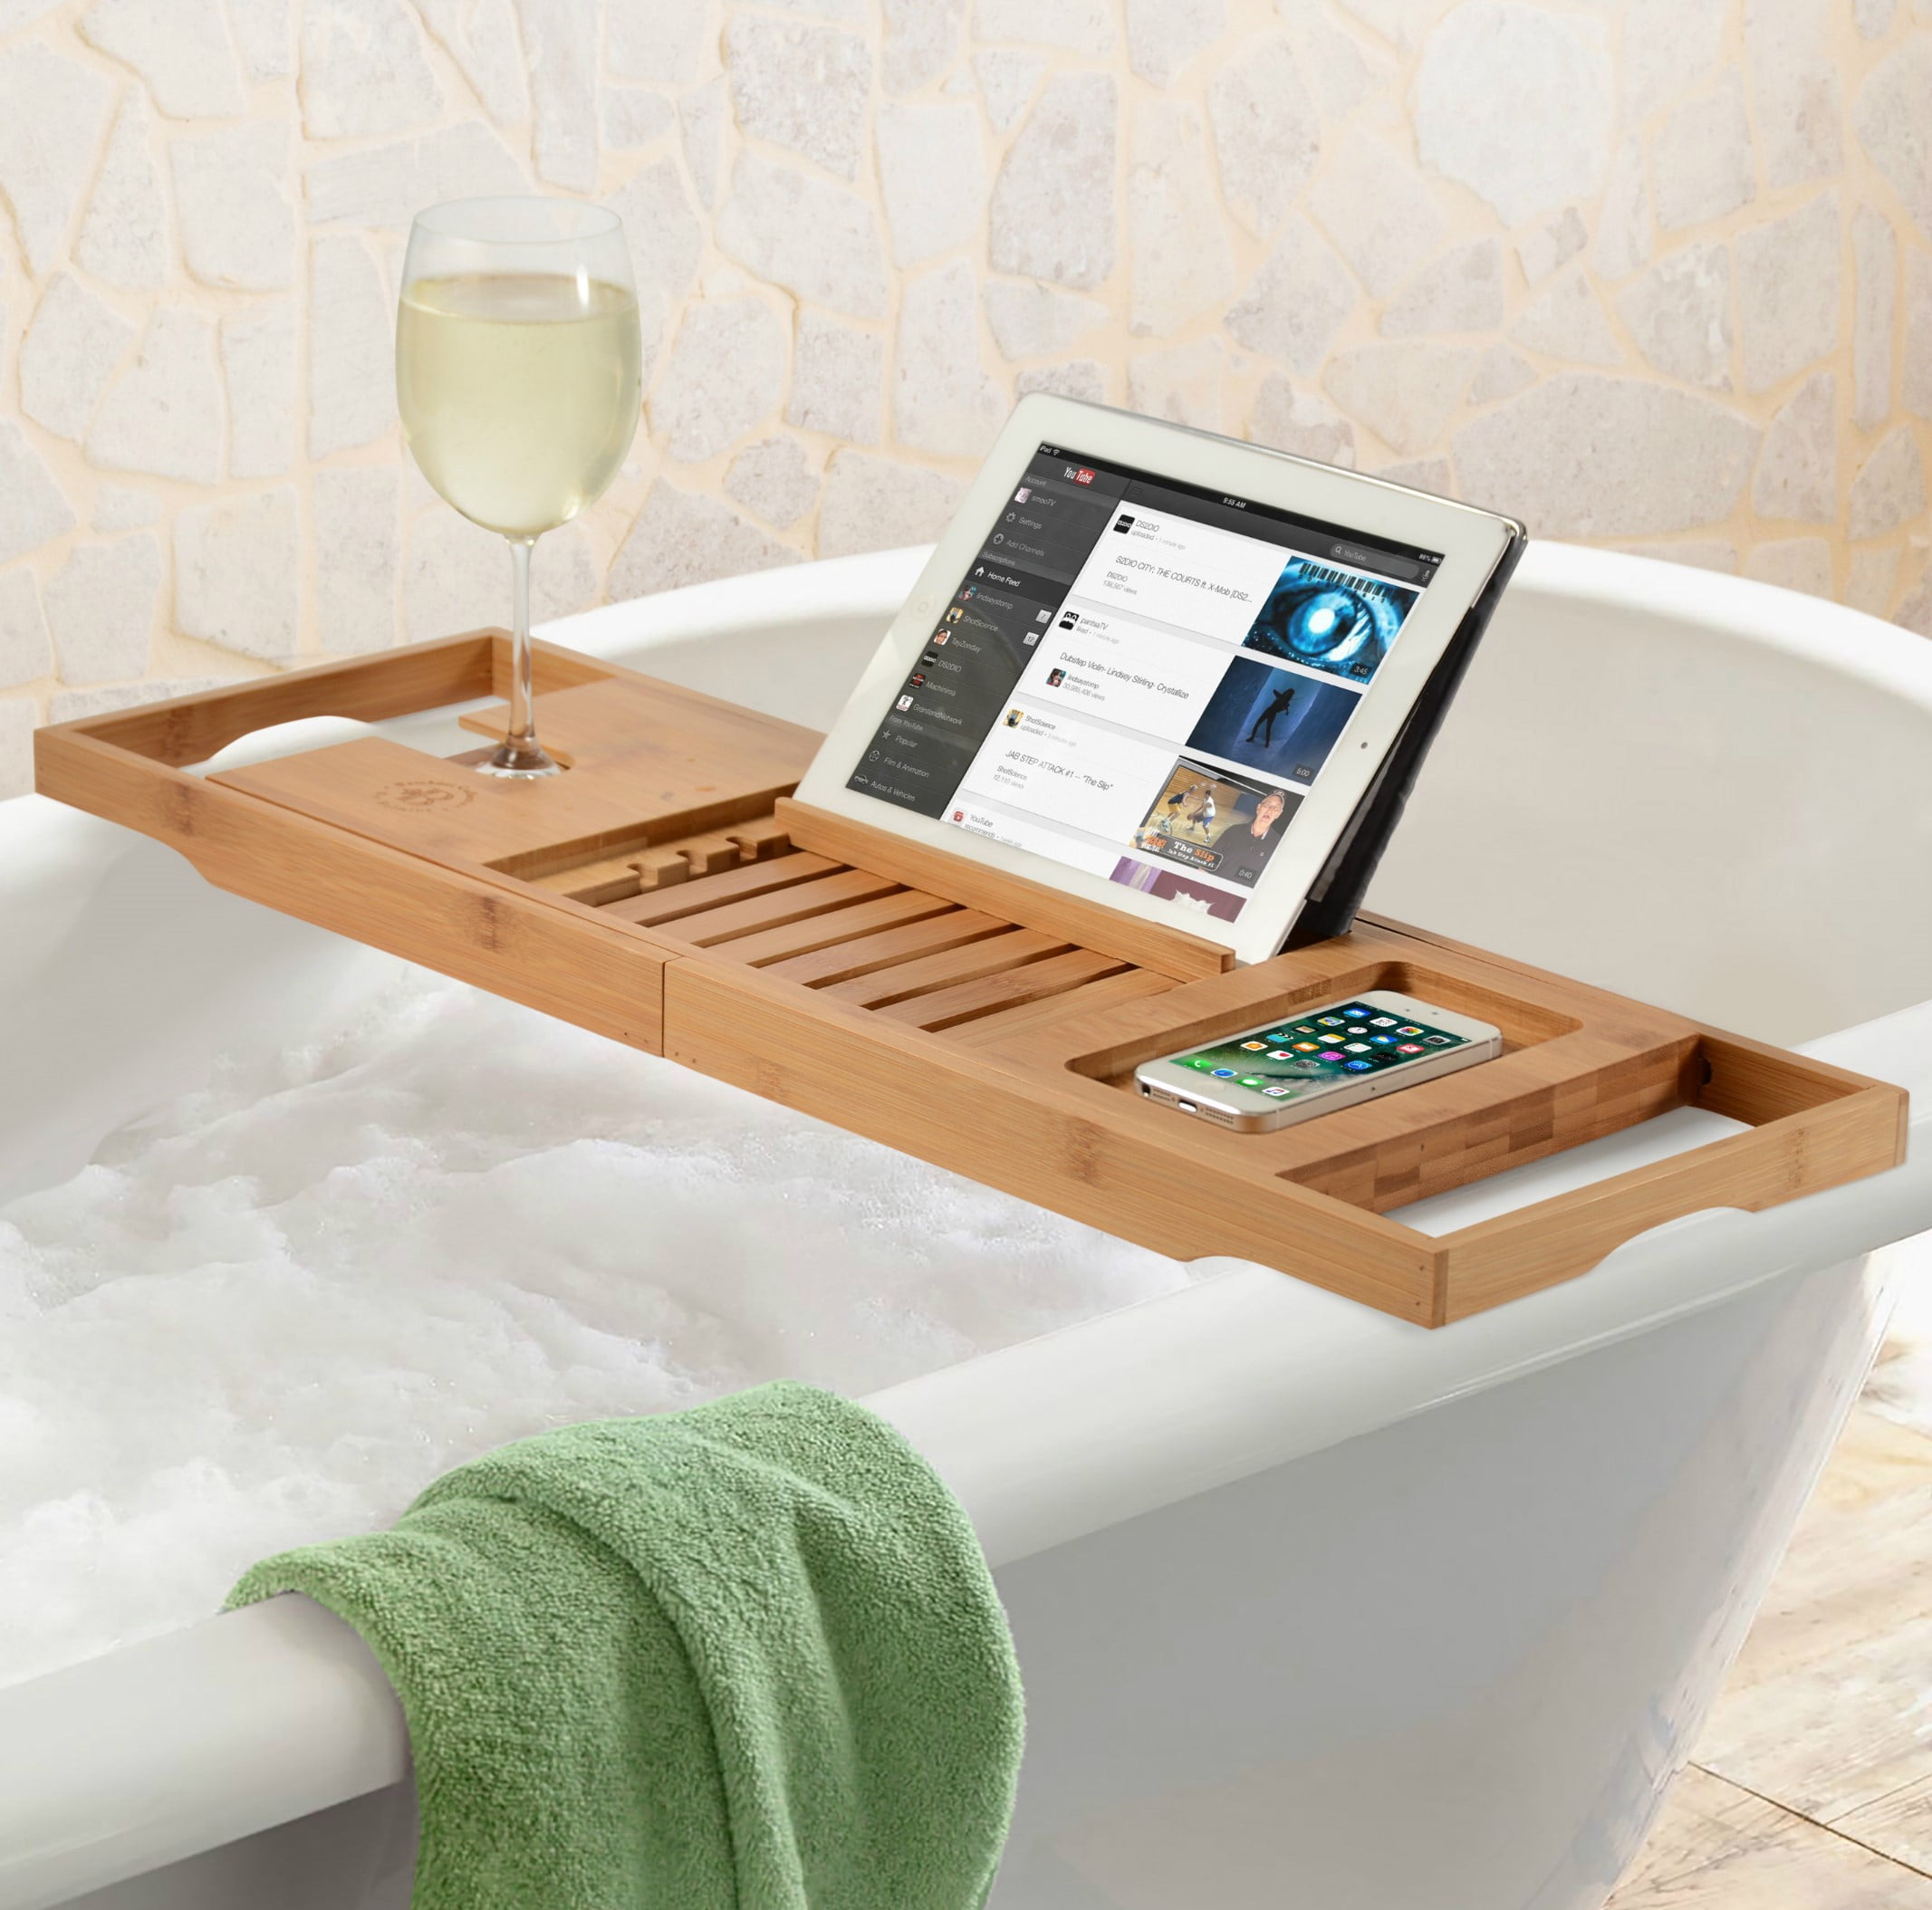 Bathtub Caddy - Foldable Expandable Size, Fits Most Tubs Waterproof Bathtub  Tray & Caddy Tray Holder for Wine Glass, Book, Soap, Phone - Homeitusa